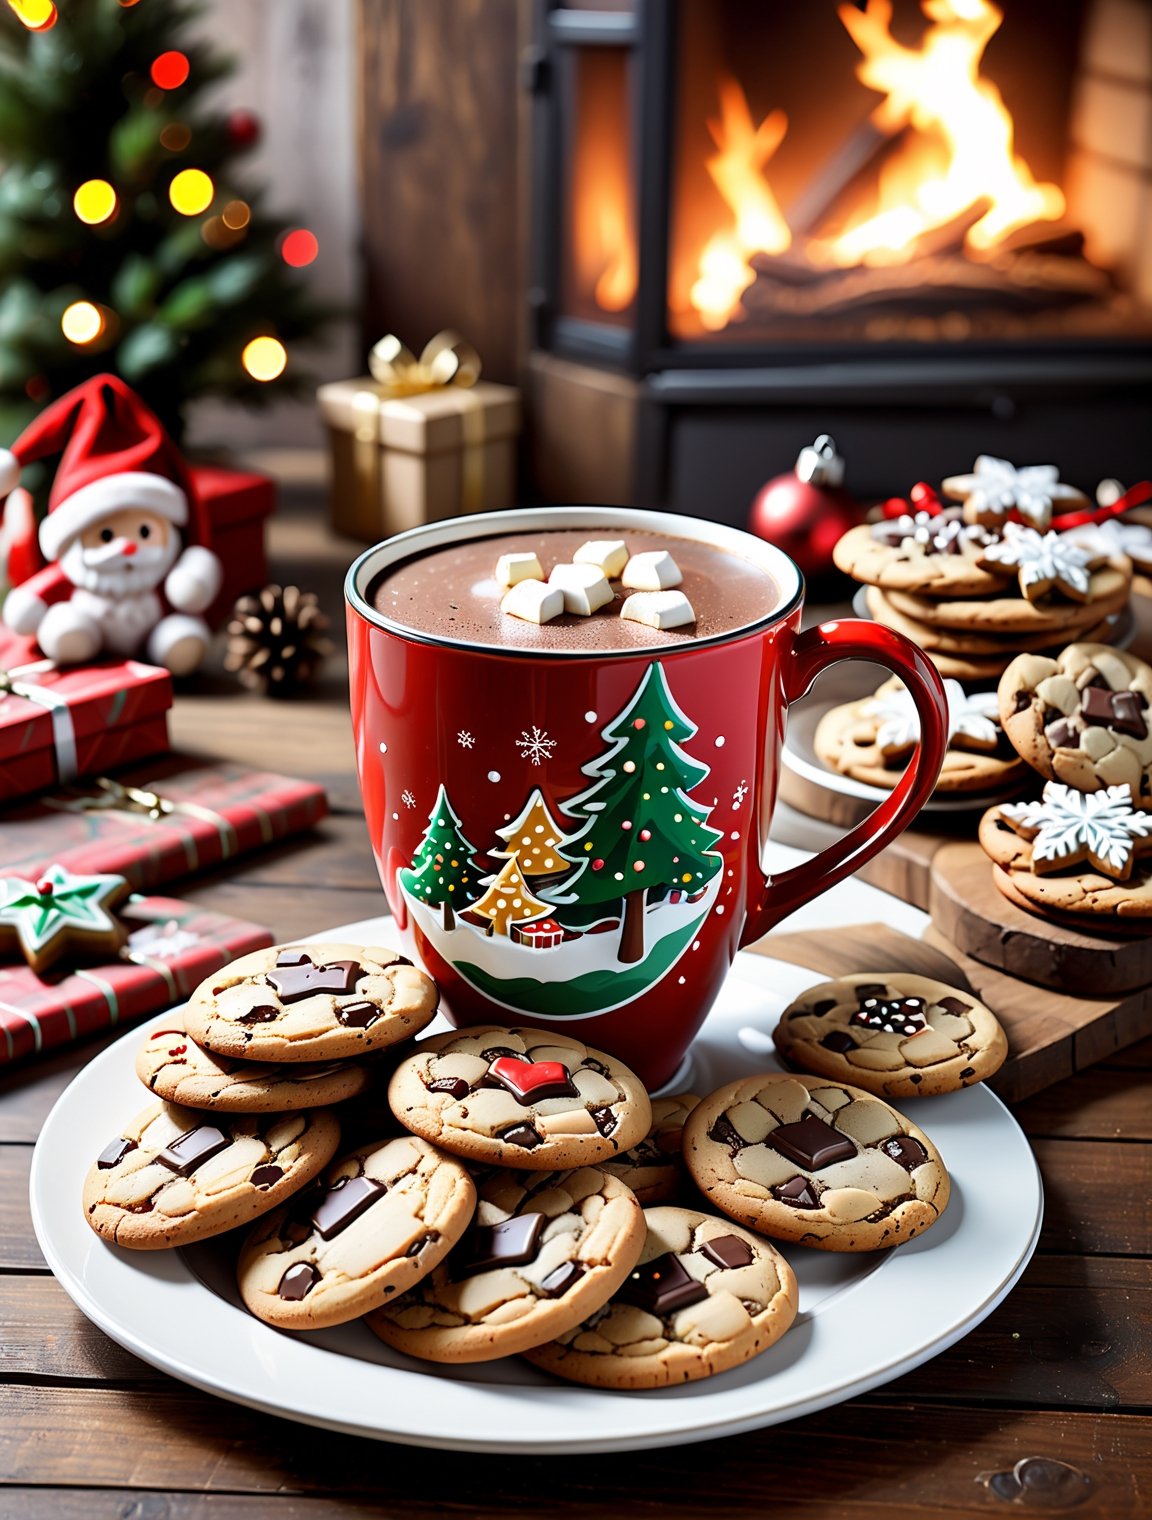 ((anime)), cookies and a cup of hot chocolate, Christmas setting, dynamic angle, depth of field, detail XL, realistic